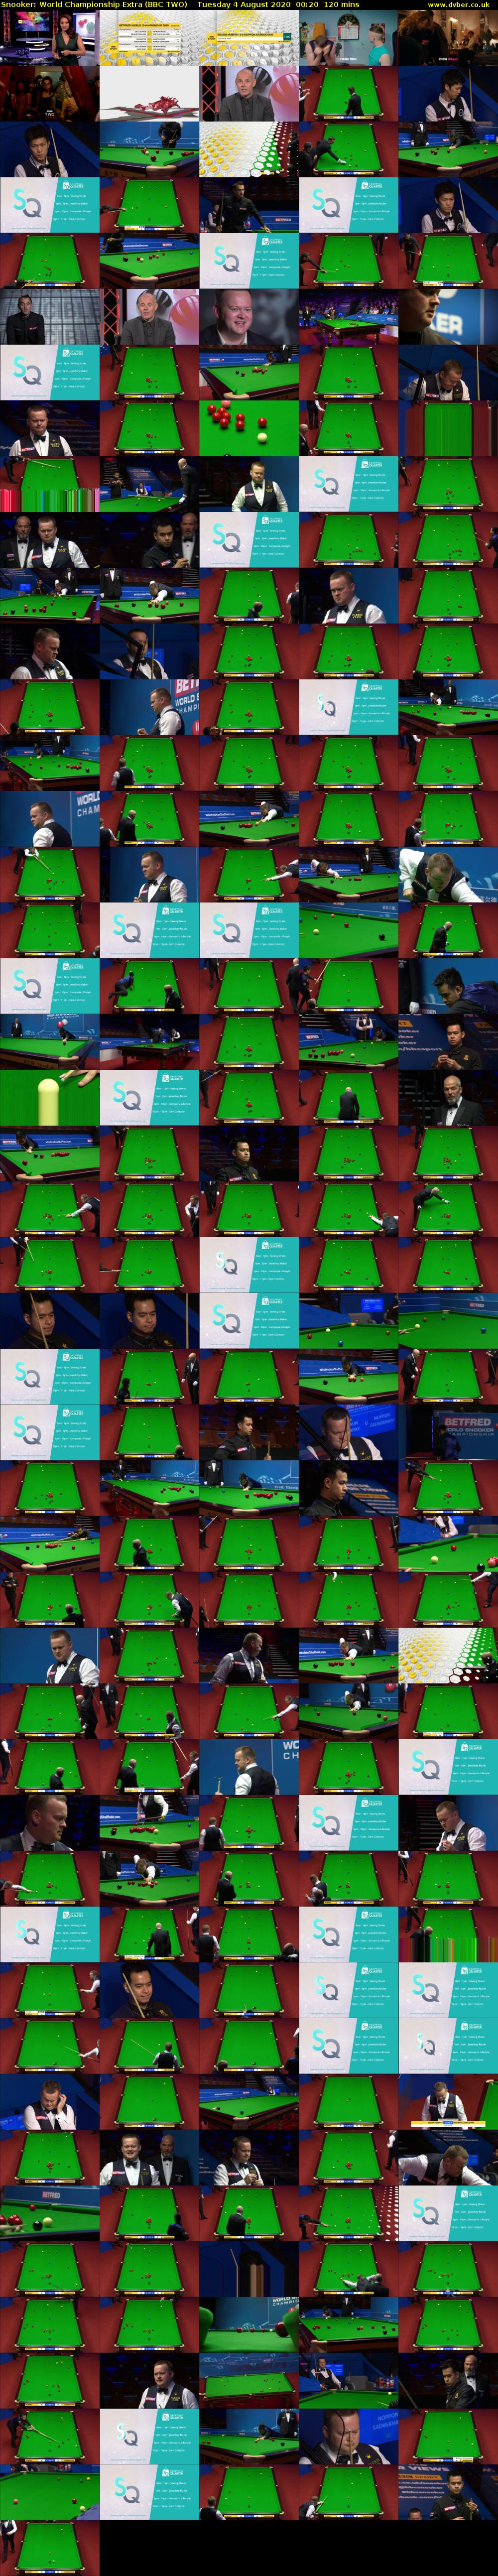 Snooker: World Championship Extra (BBC TWO) Tuesday 4 August 2020 00:20 - 02:20